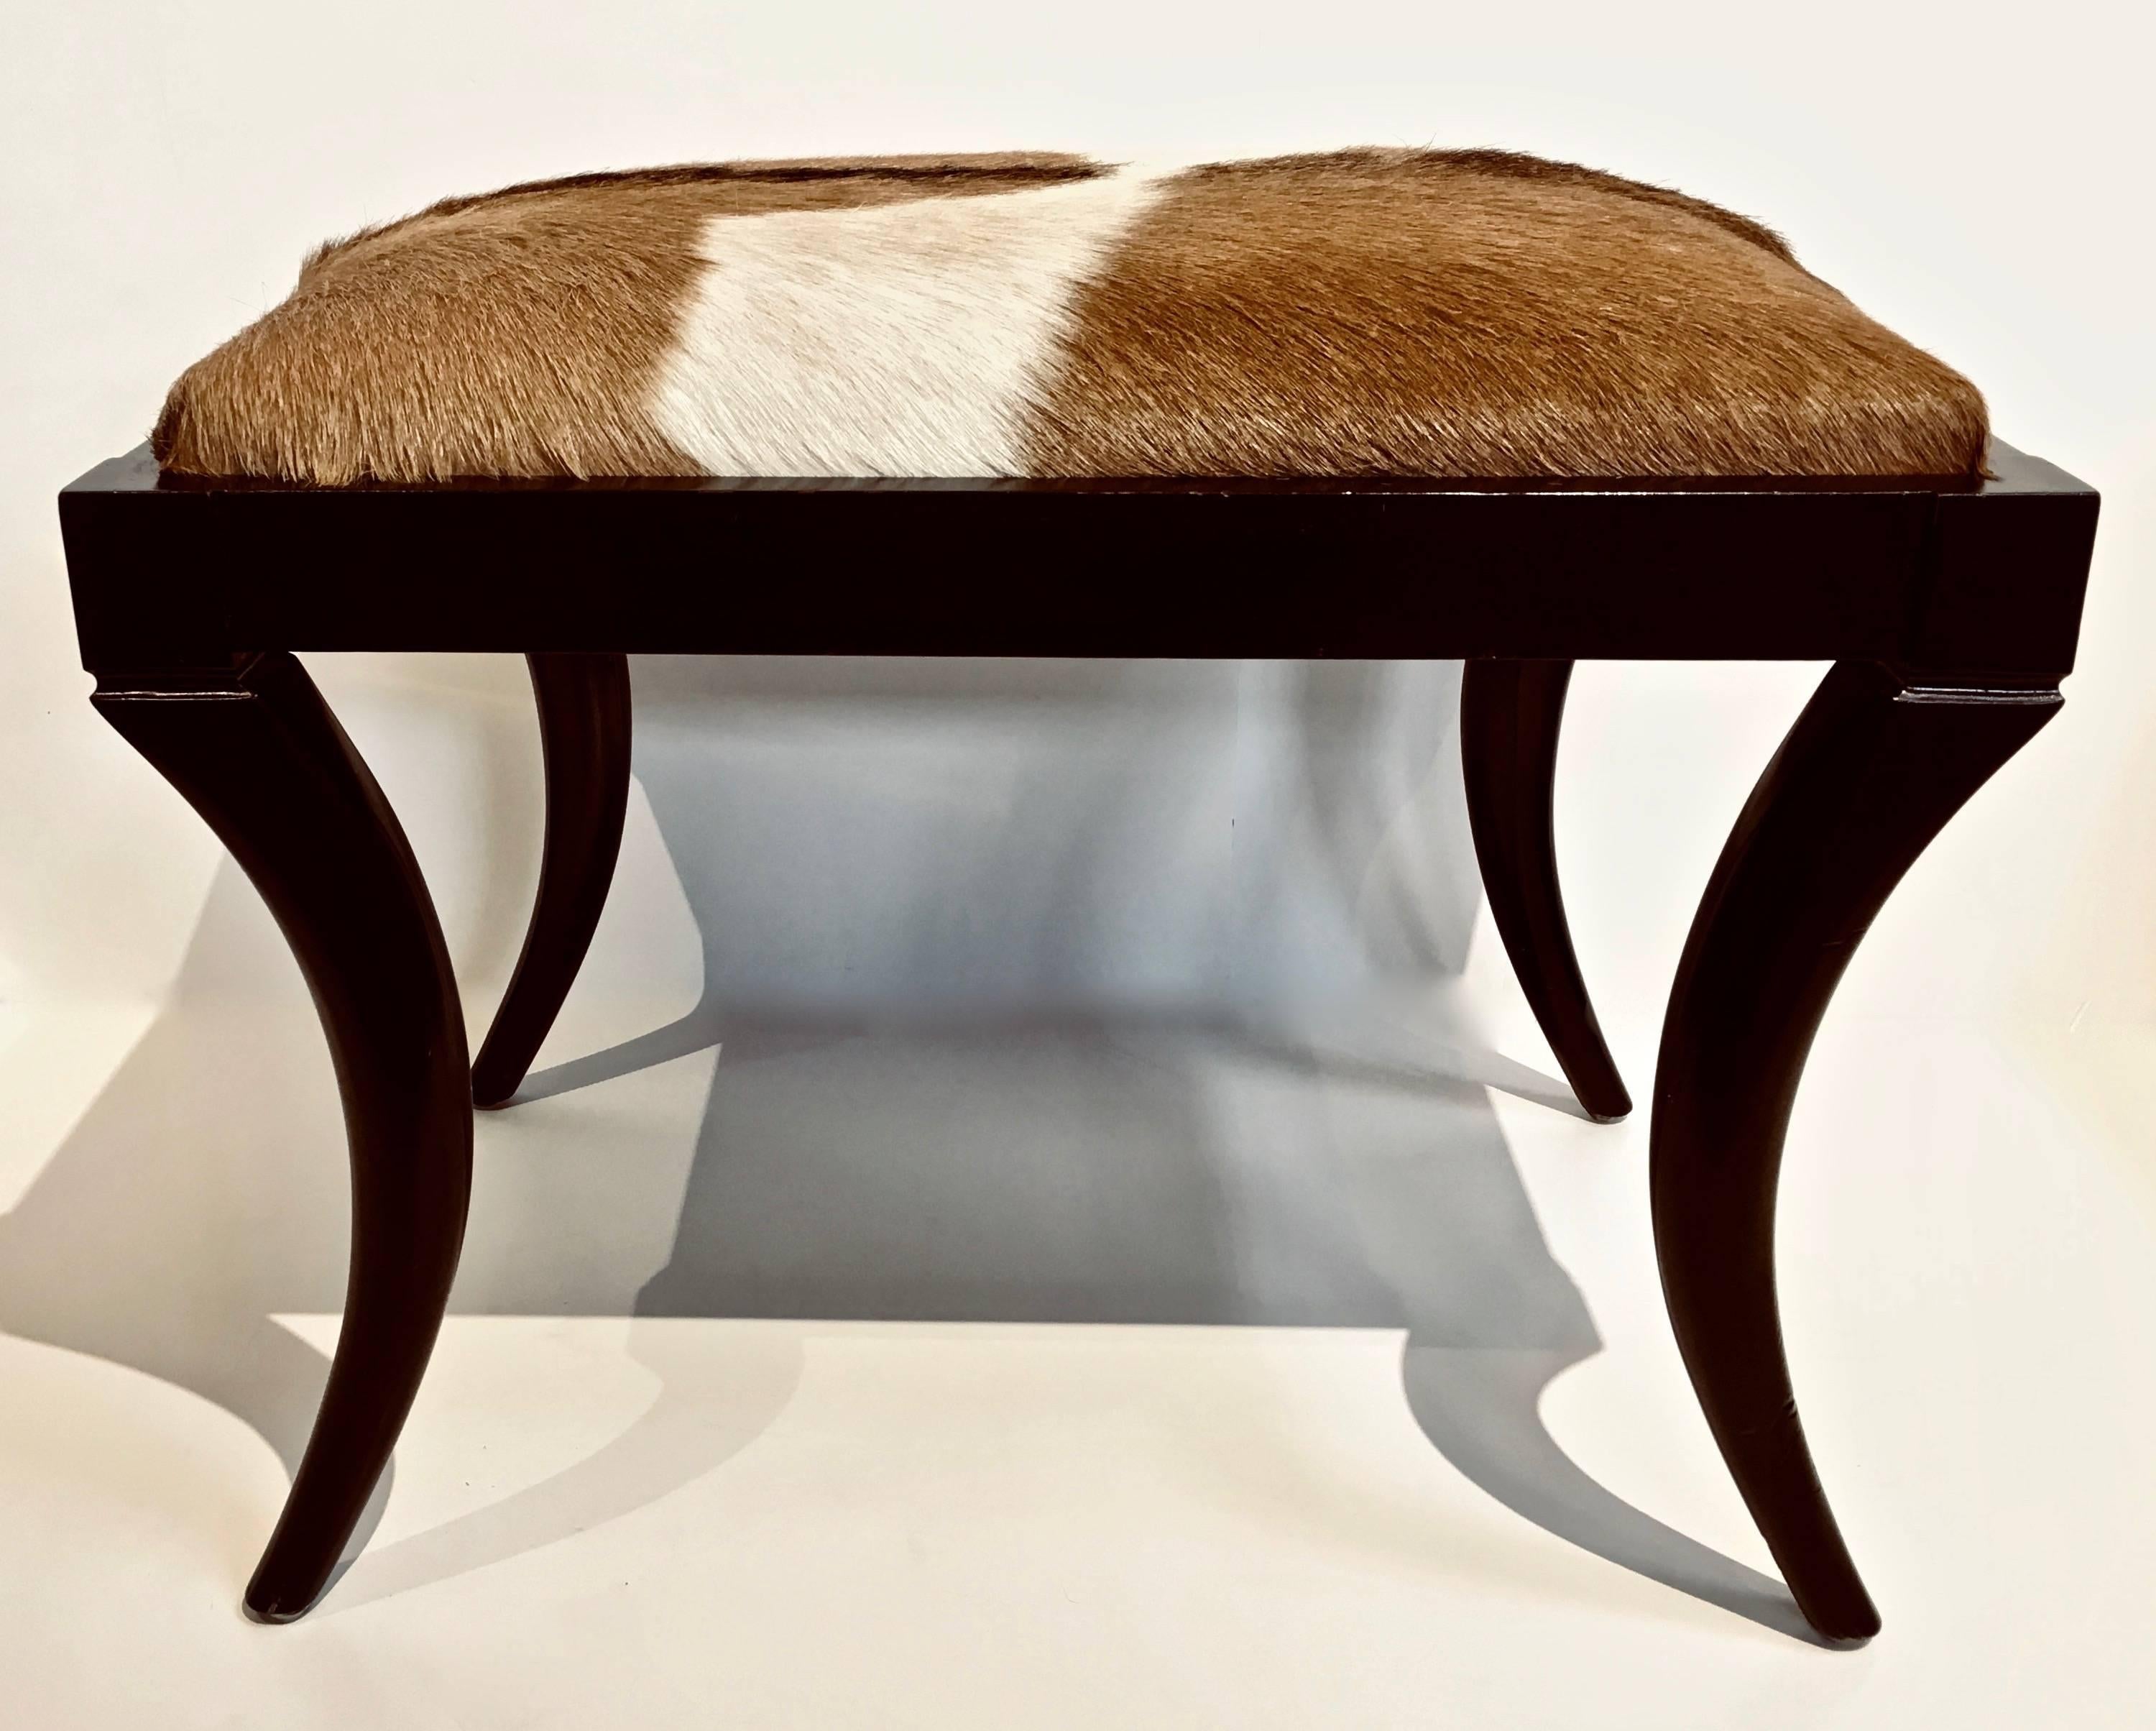 Pony Skin Upholstered Hide Bench with Saber Legs In Good Condition For Sale In Stamford, CT